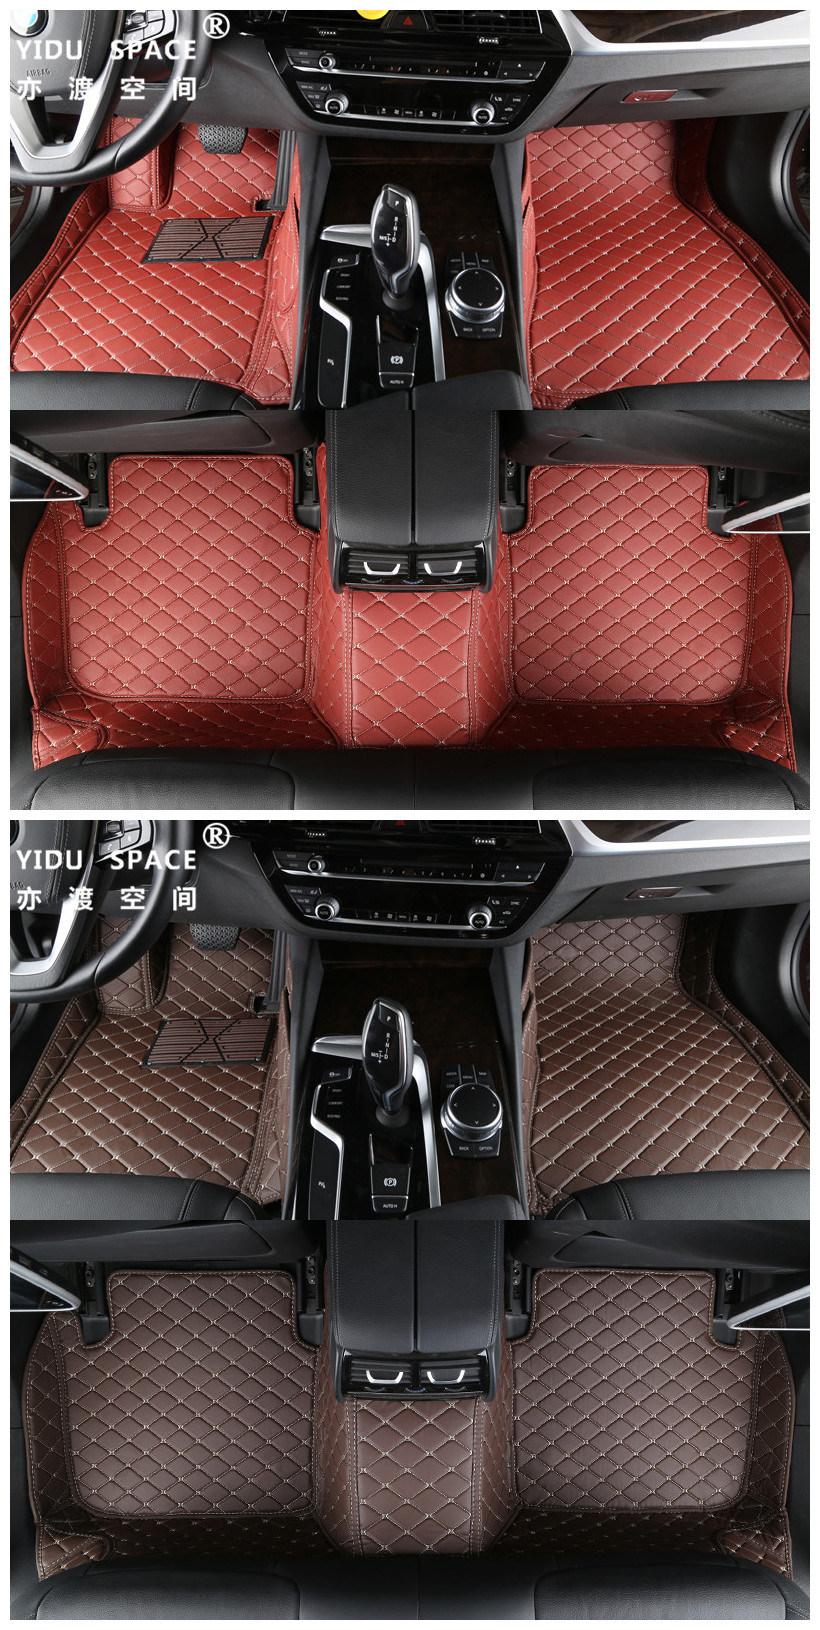 Environment-Friendly Leather Special 5D Anti Slip Wholesale Car Foot Mat